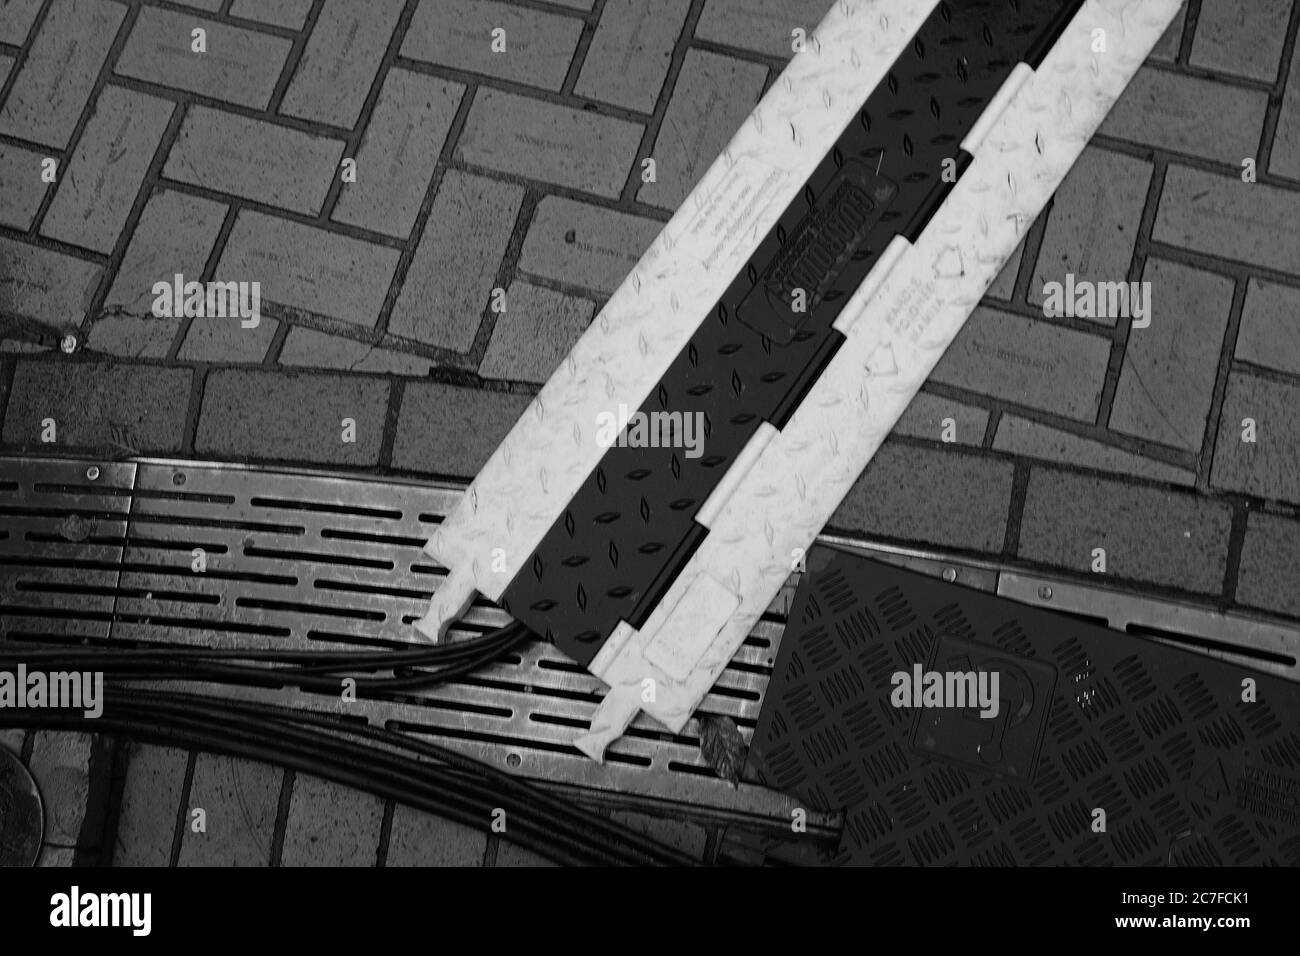 PORTLAND, UNITED STATES - Dec 14, 2019: A high angle greyscale shot of wires on the ground in Portland, United States Stock Photo